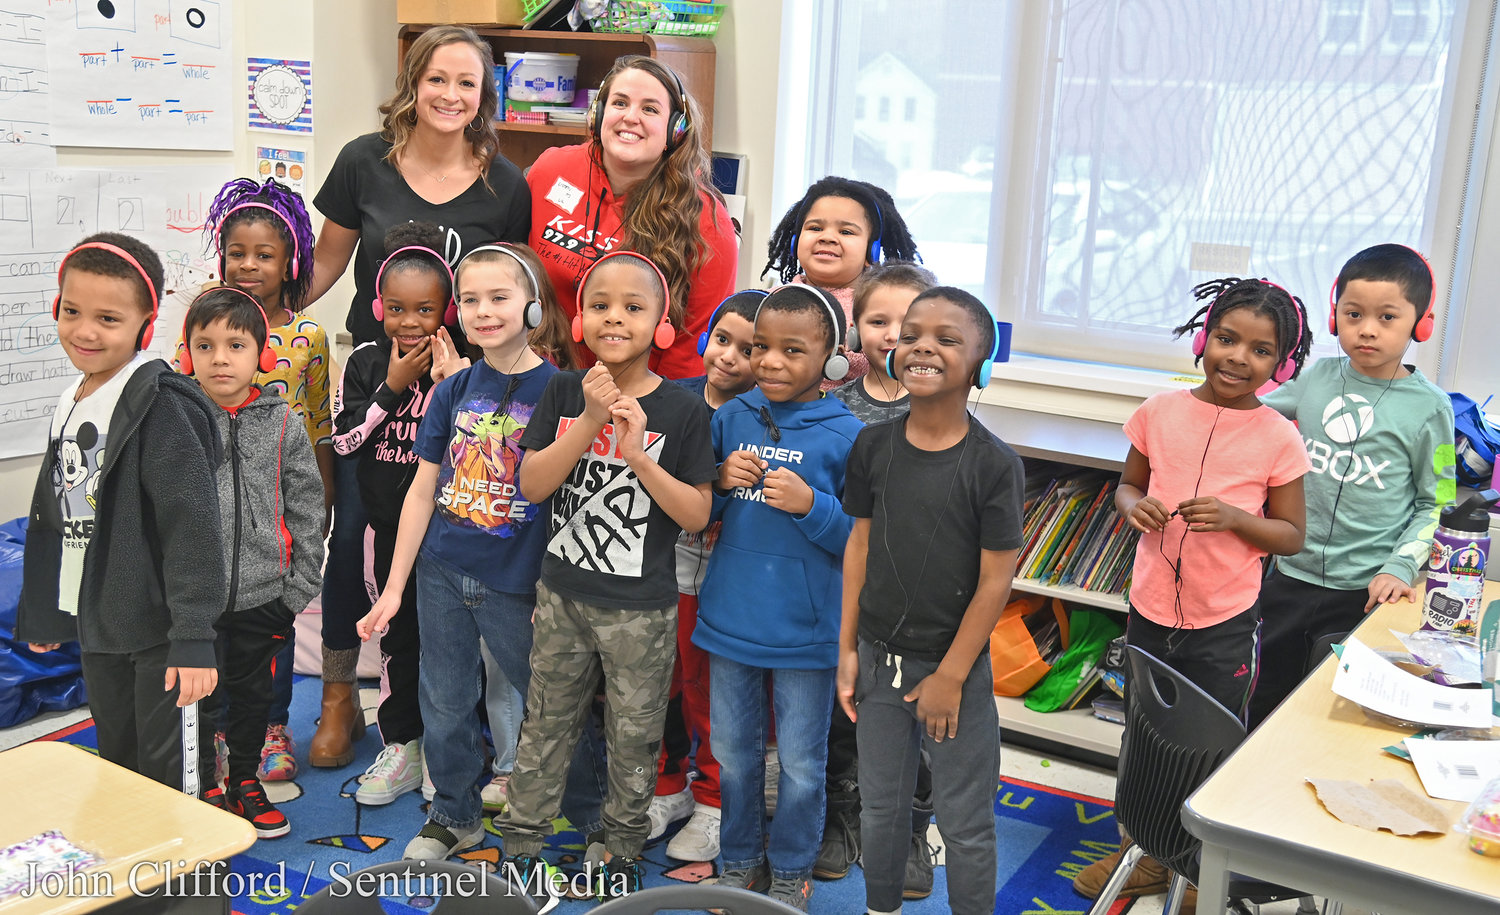 Teacher Jordyn Dunlap and her class with Liz Ellis from Kiss FM  after the personality read a book to her class Friday morning at Kernan Elementary School.